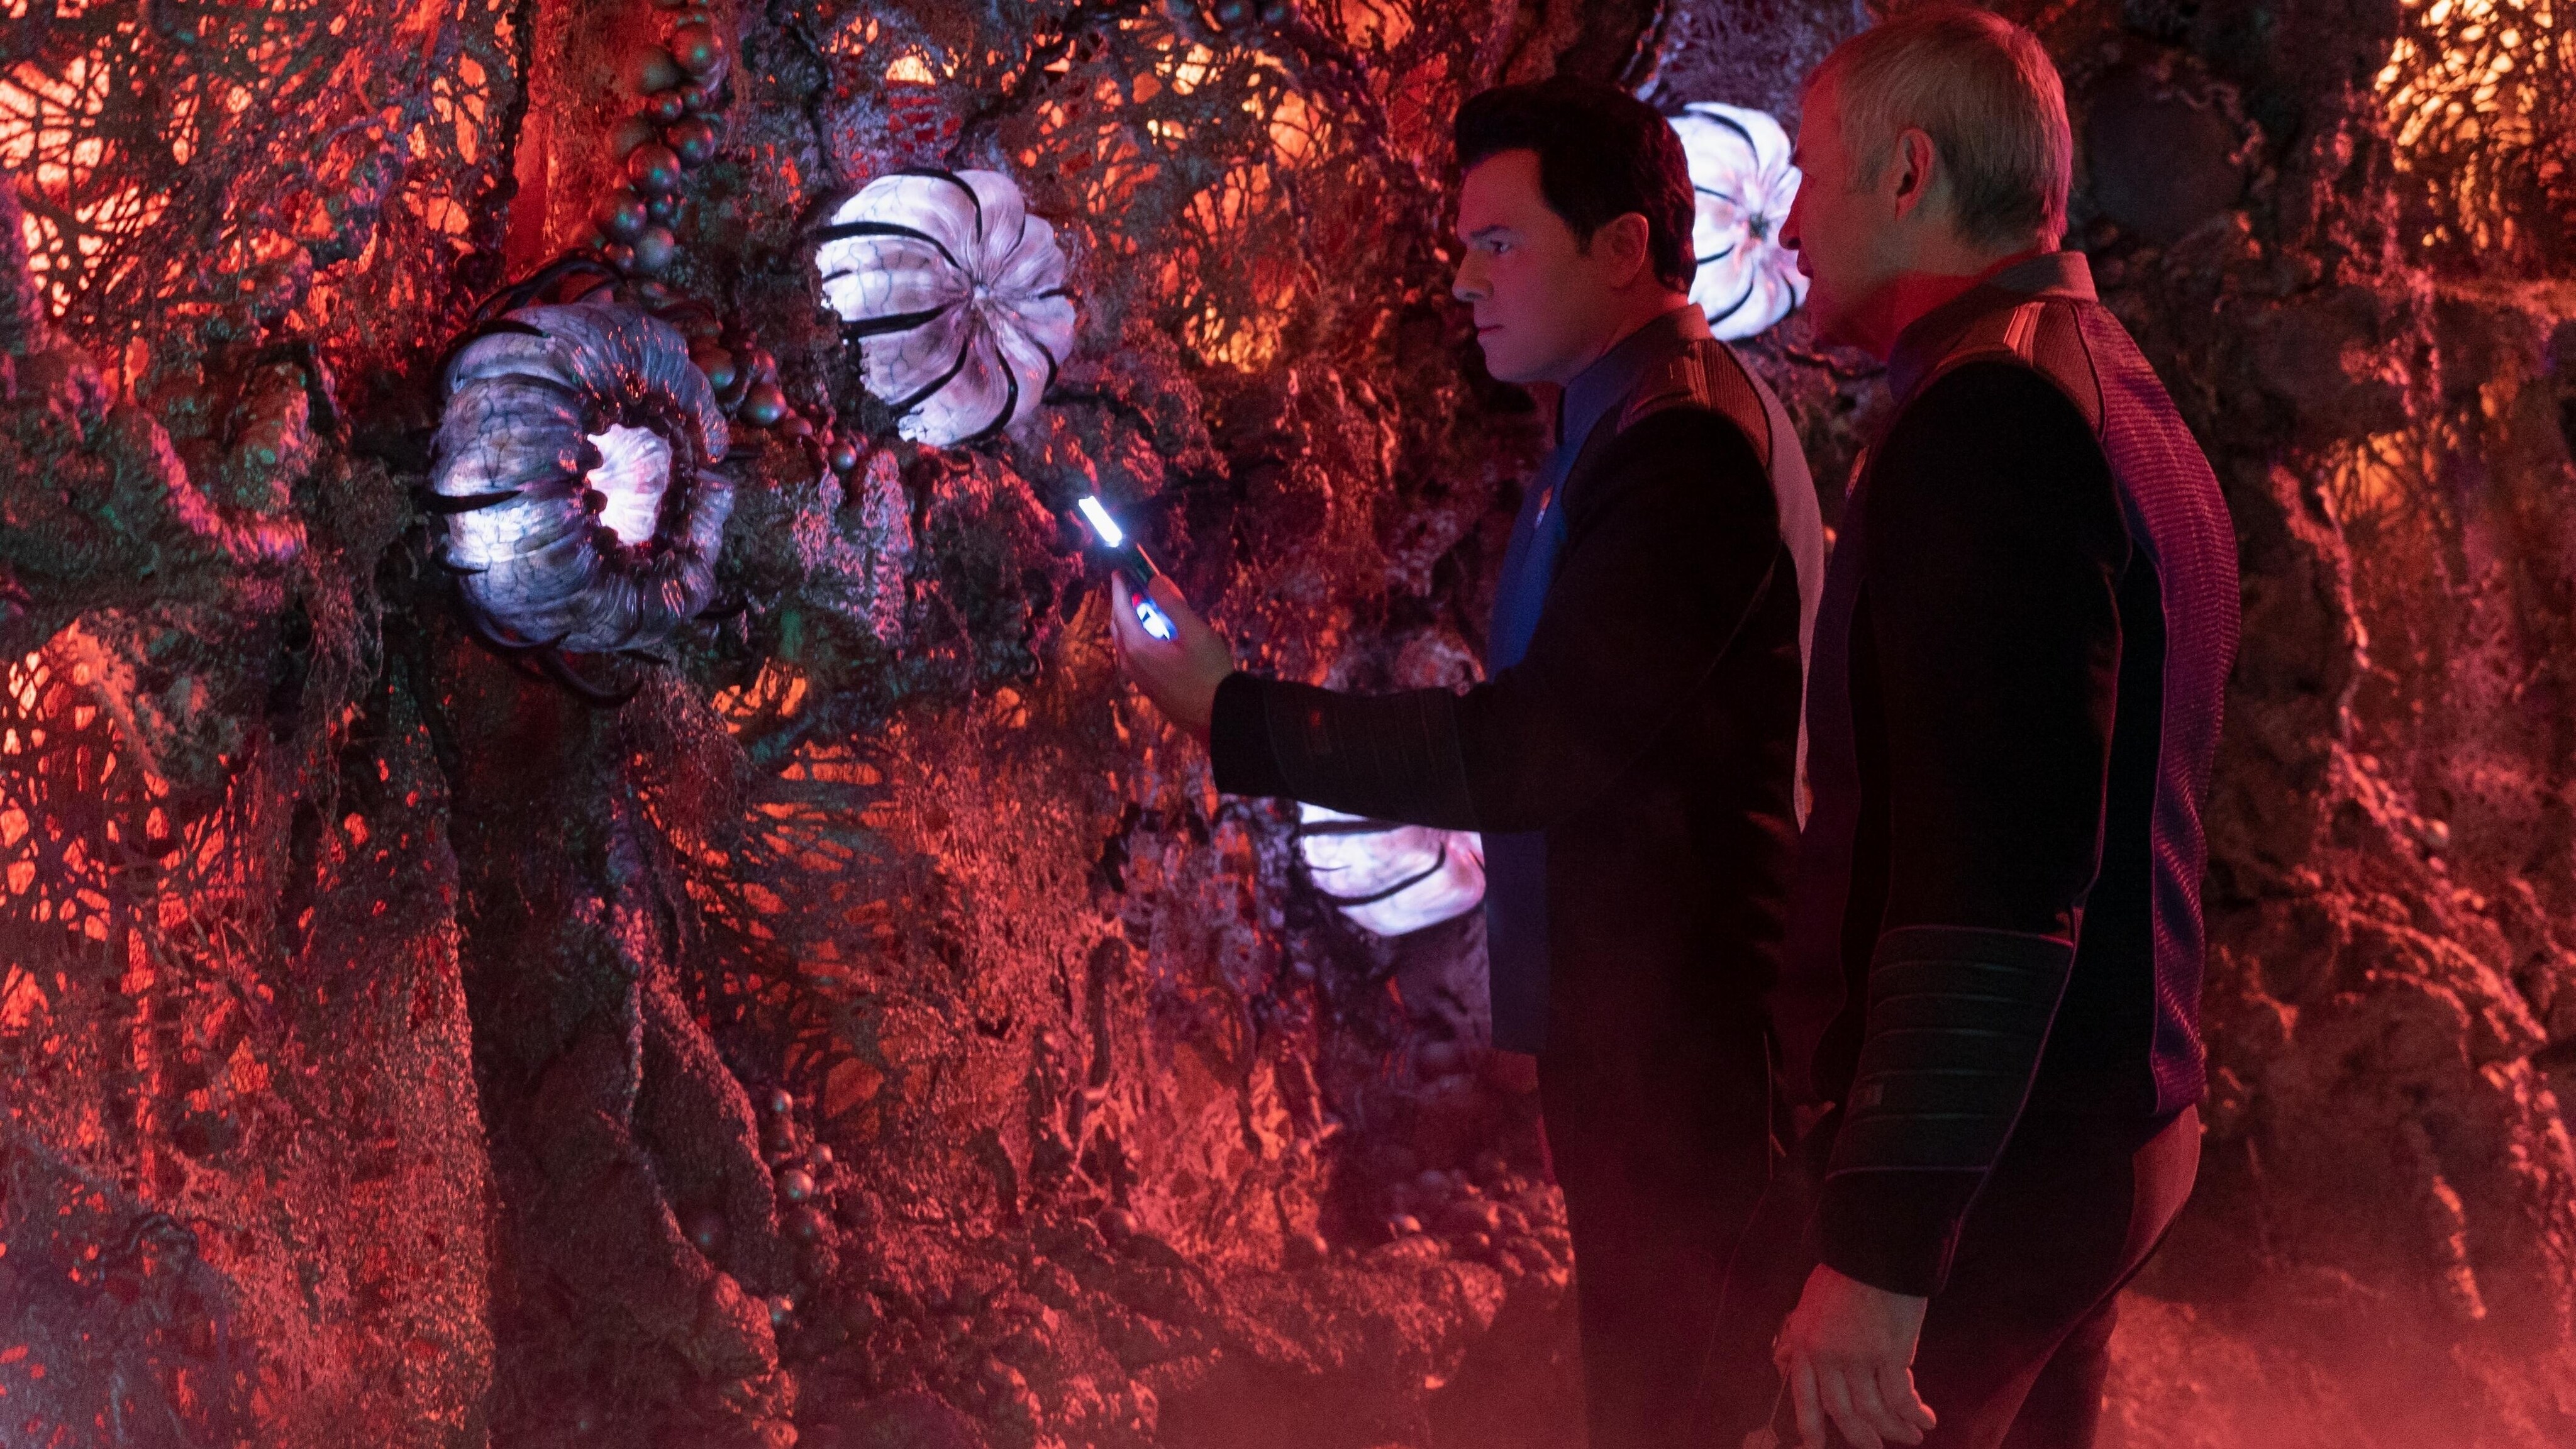 The Orville: New Horizons -- “Shadow Realms” - Episode 302 -- The Orville crew embarks on a mission to explore a dangerous region of Krill space. Capt. Ed Mercer (Seth MacFarlane) and Admiral Christie (James Read), shown. (Photo by: Kevin Estrada/Hulu)